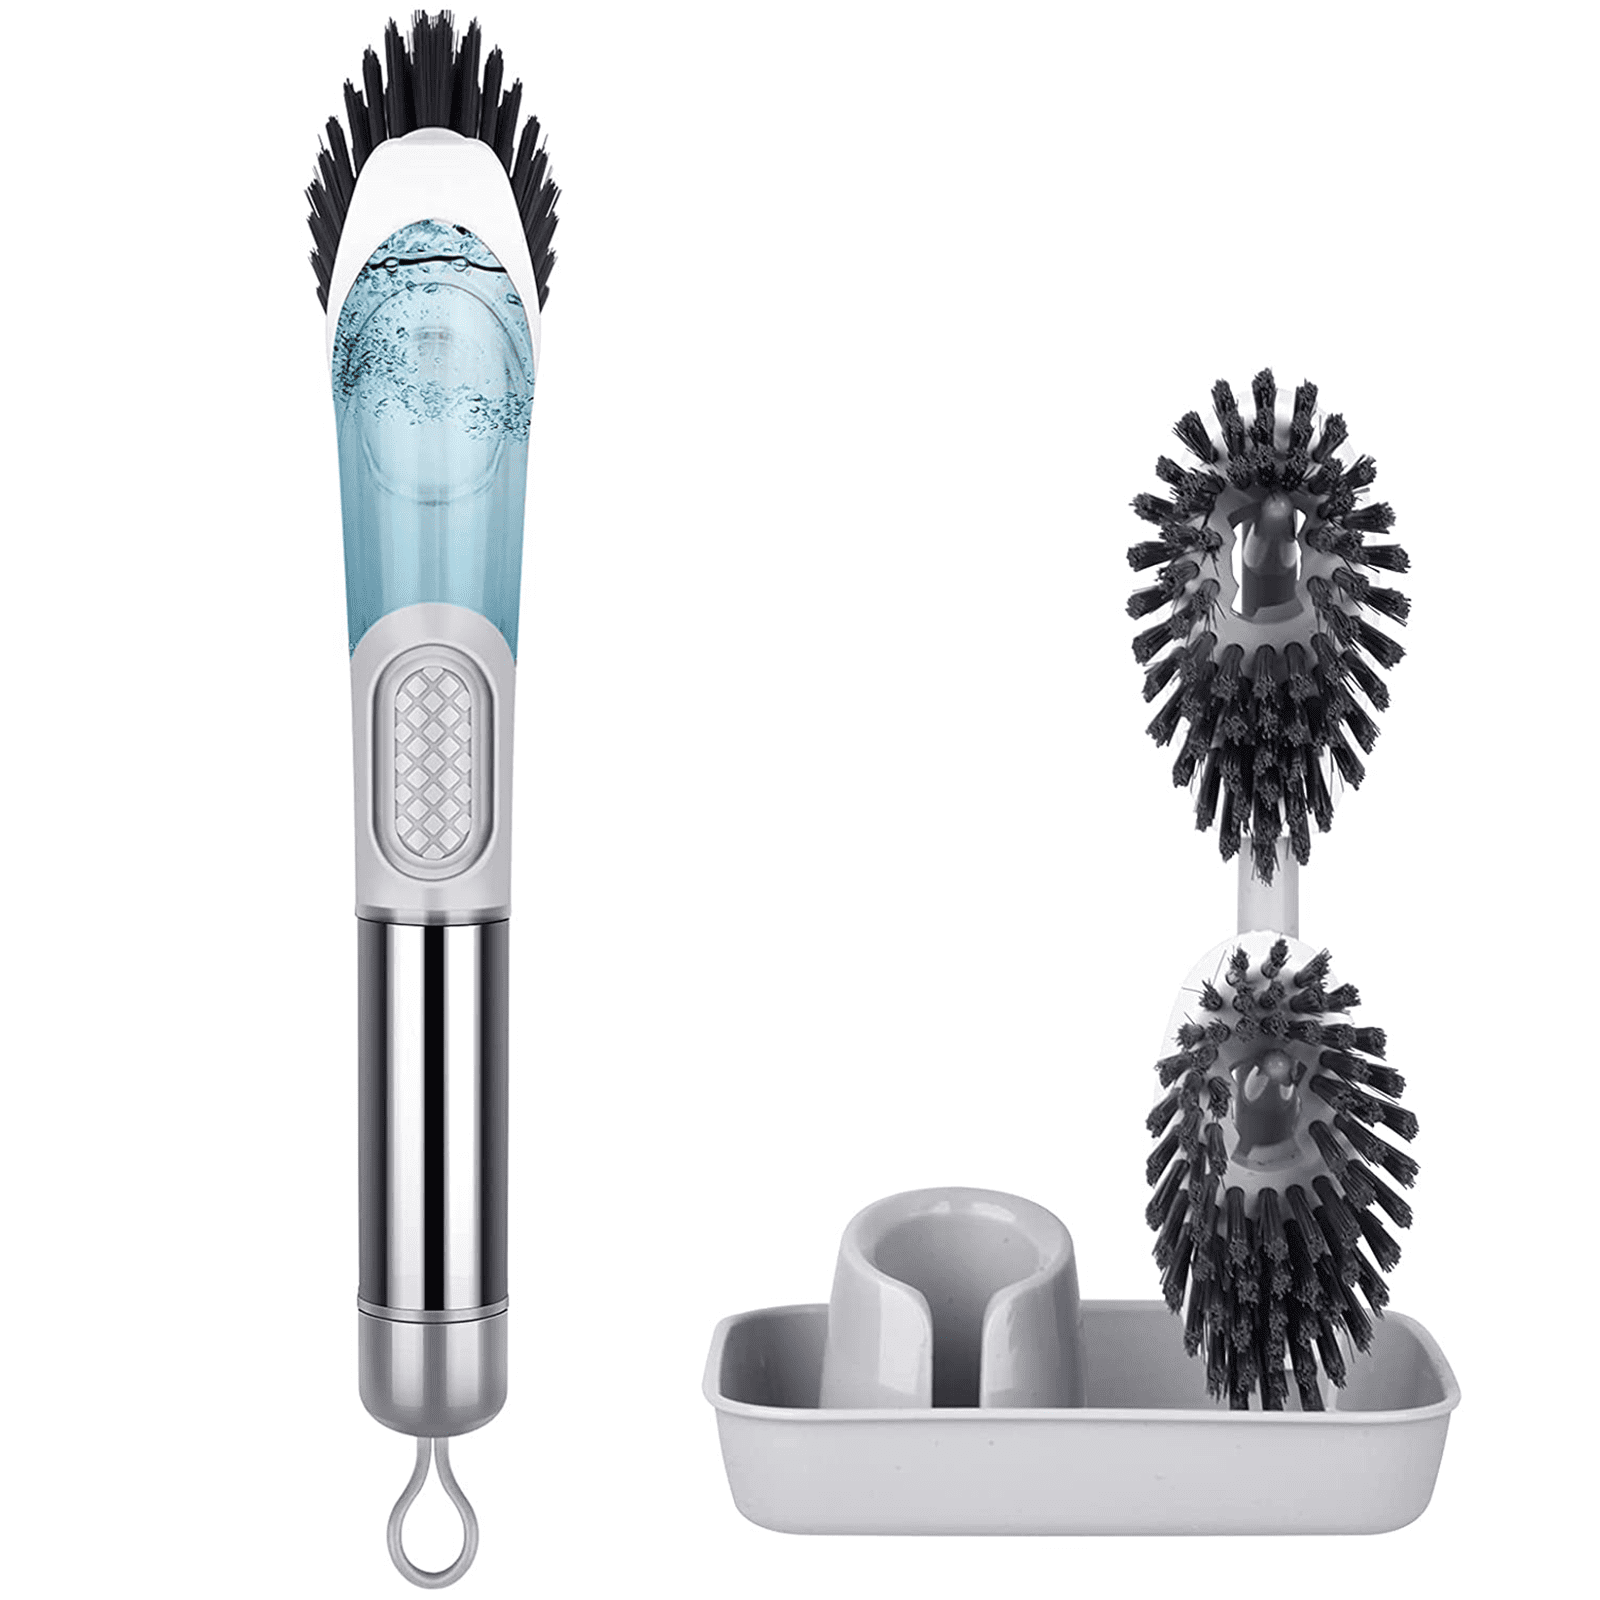 Soap Dispensing Dish Brush Set - FORSPEEDER Kitchen Brush with Stand 3  Brush Replacement Heads Stainless Steel Handle, Dish Wand Scrub Brush for